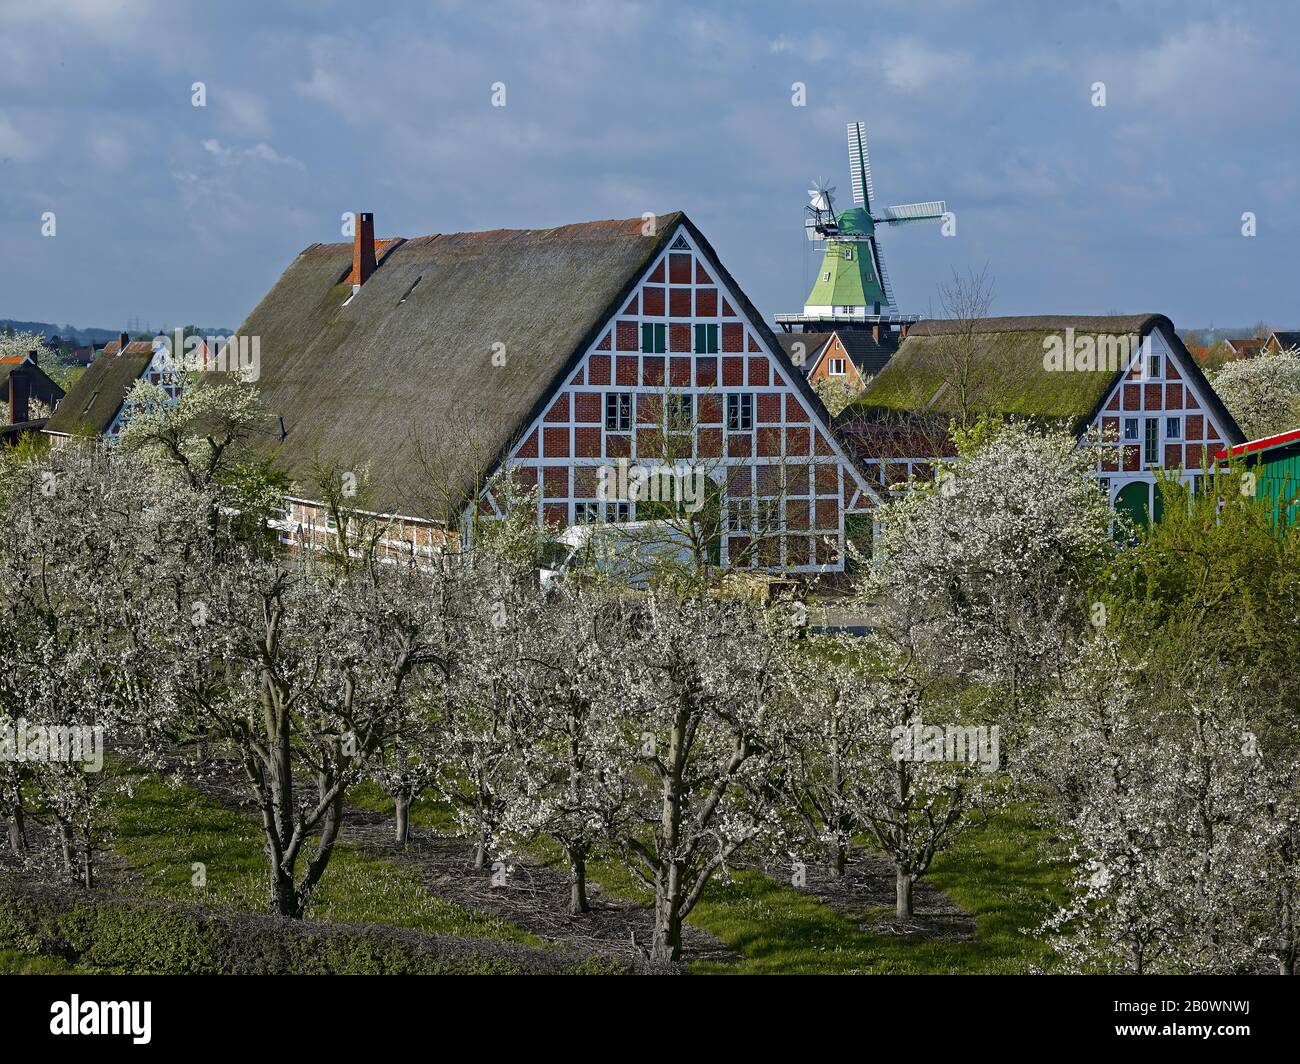 Venti Amica windmill in Twielenfleth-Lühe with orchard, Altes Land, Landkreis Stade, Lower Saxony, Germany, Europe Stock Photo